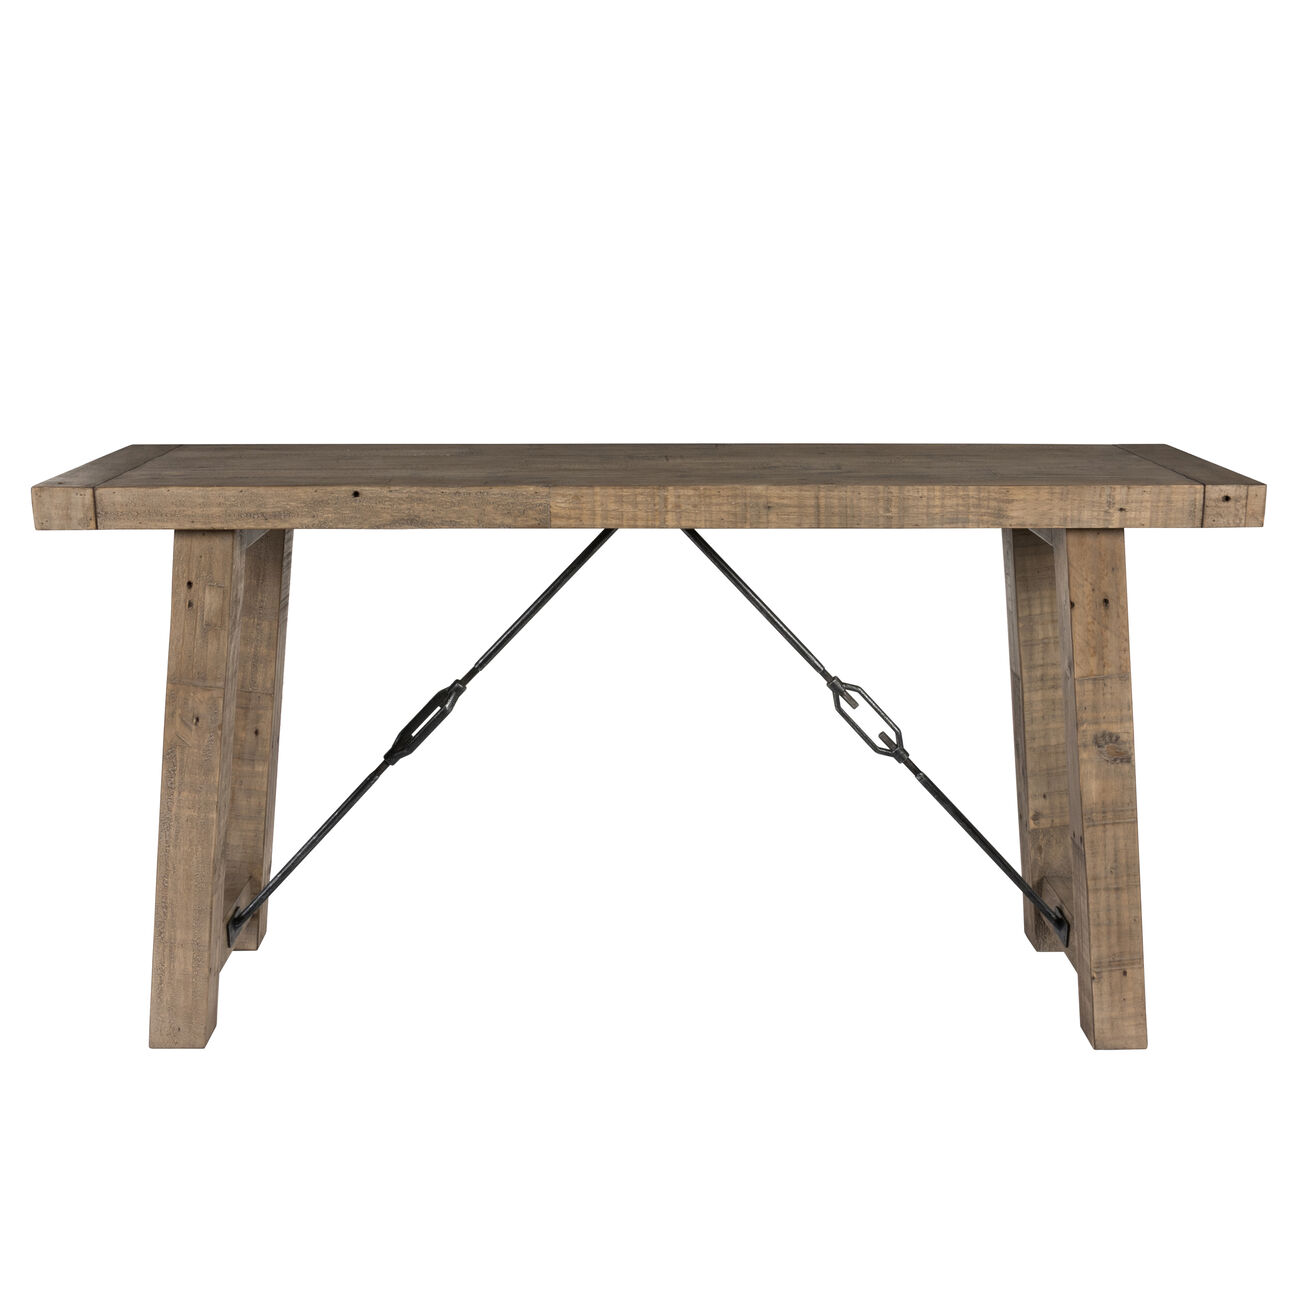 Handcrafted Reclaimed Wood Console Table with Grains, Weathered Gray